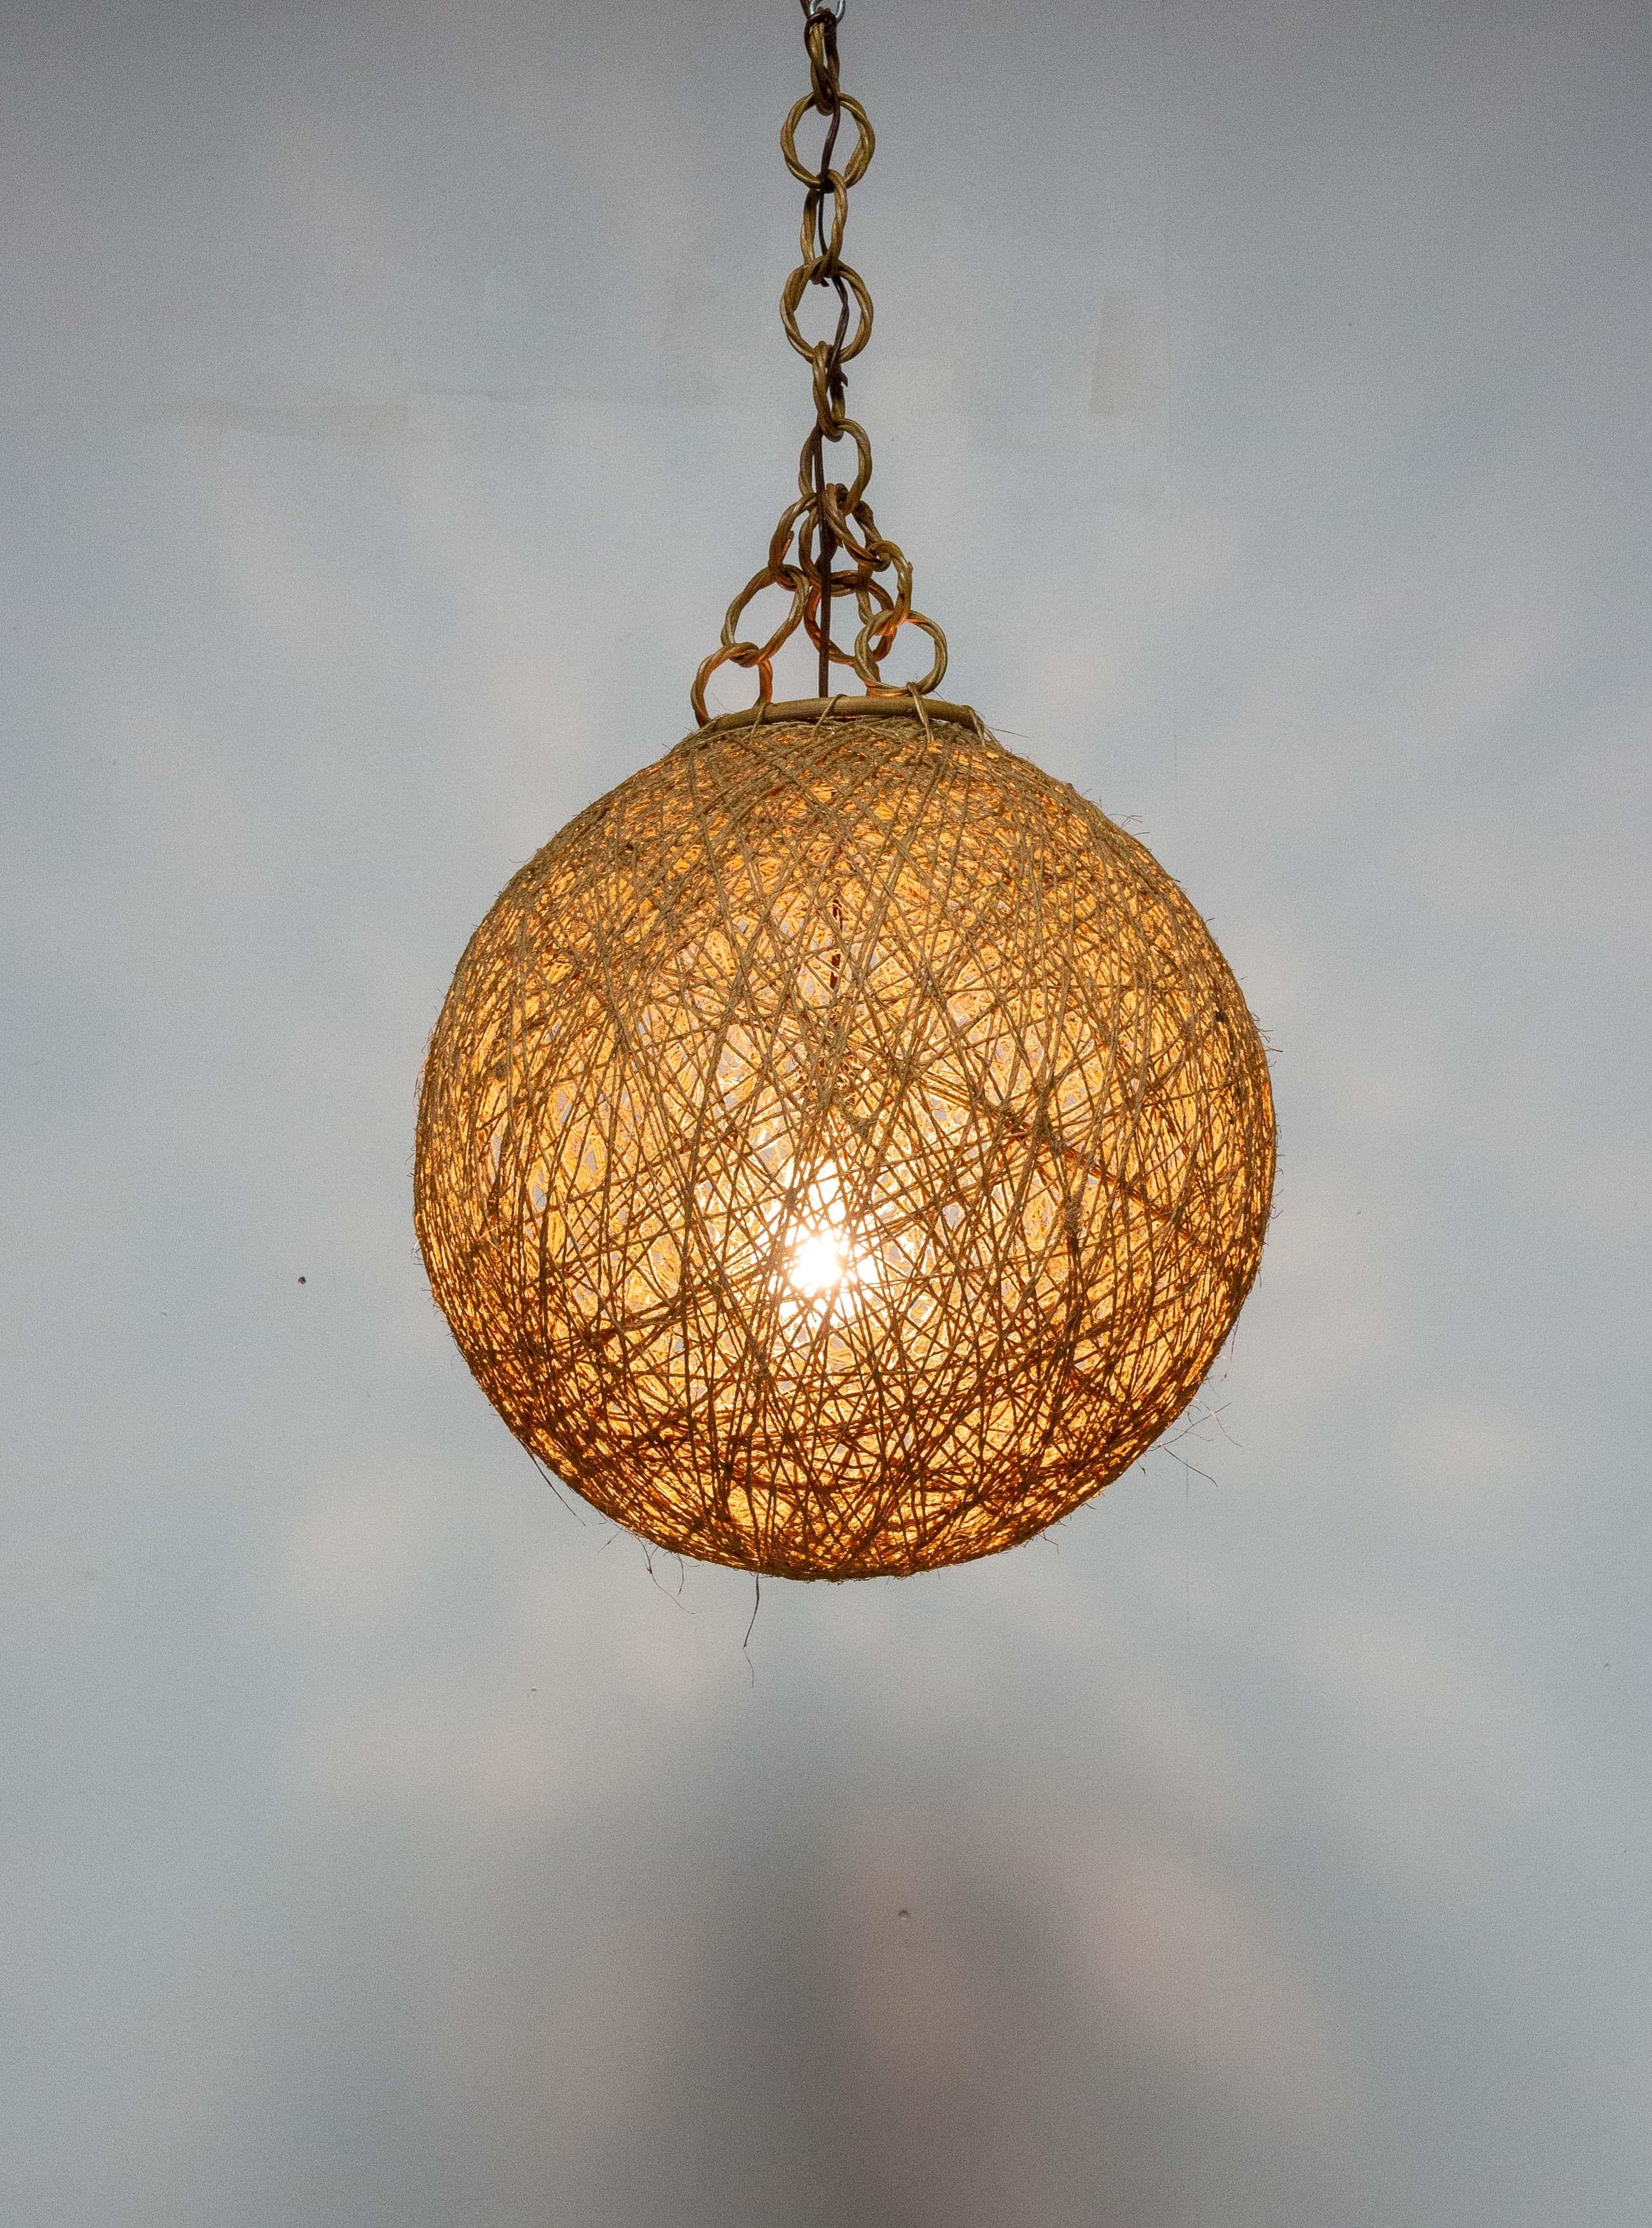 French lustre or ceiling pendant made of string and wicker.
One bulb inside the globe
Made circa 1970.
Good condition.

Shipping:
39 / 39 / 40 cm 1 Kg.